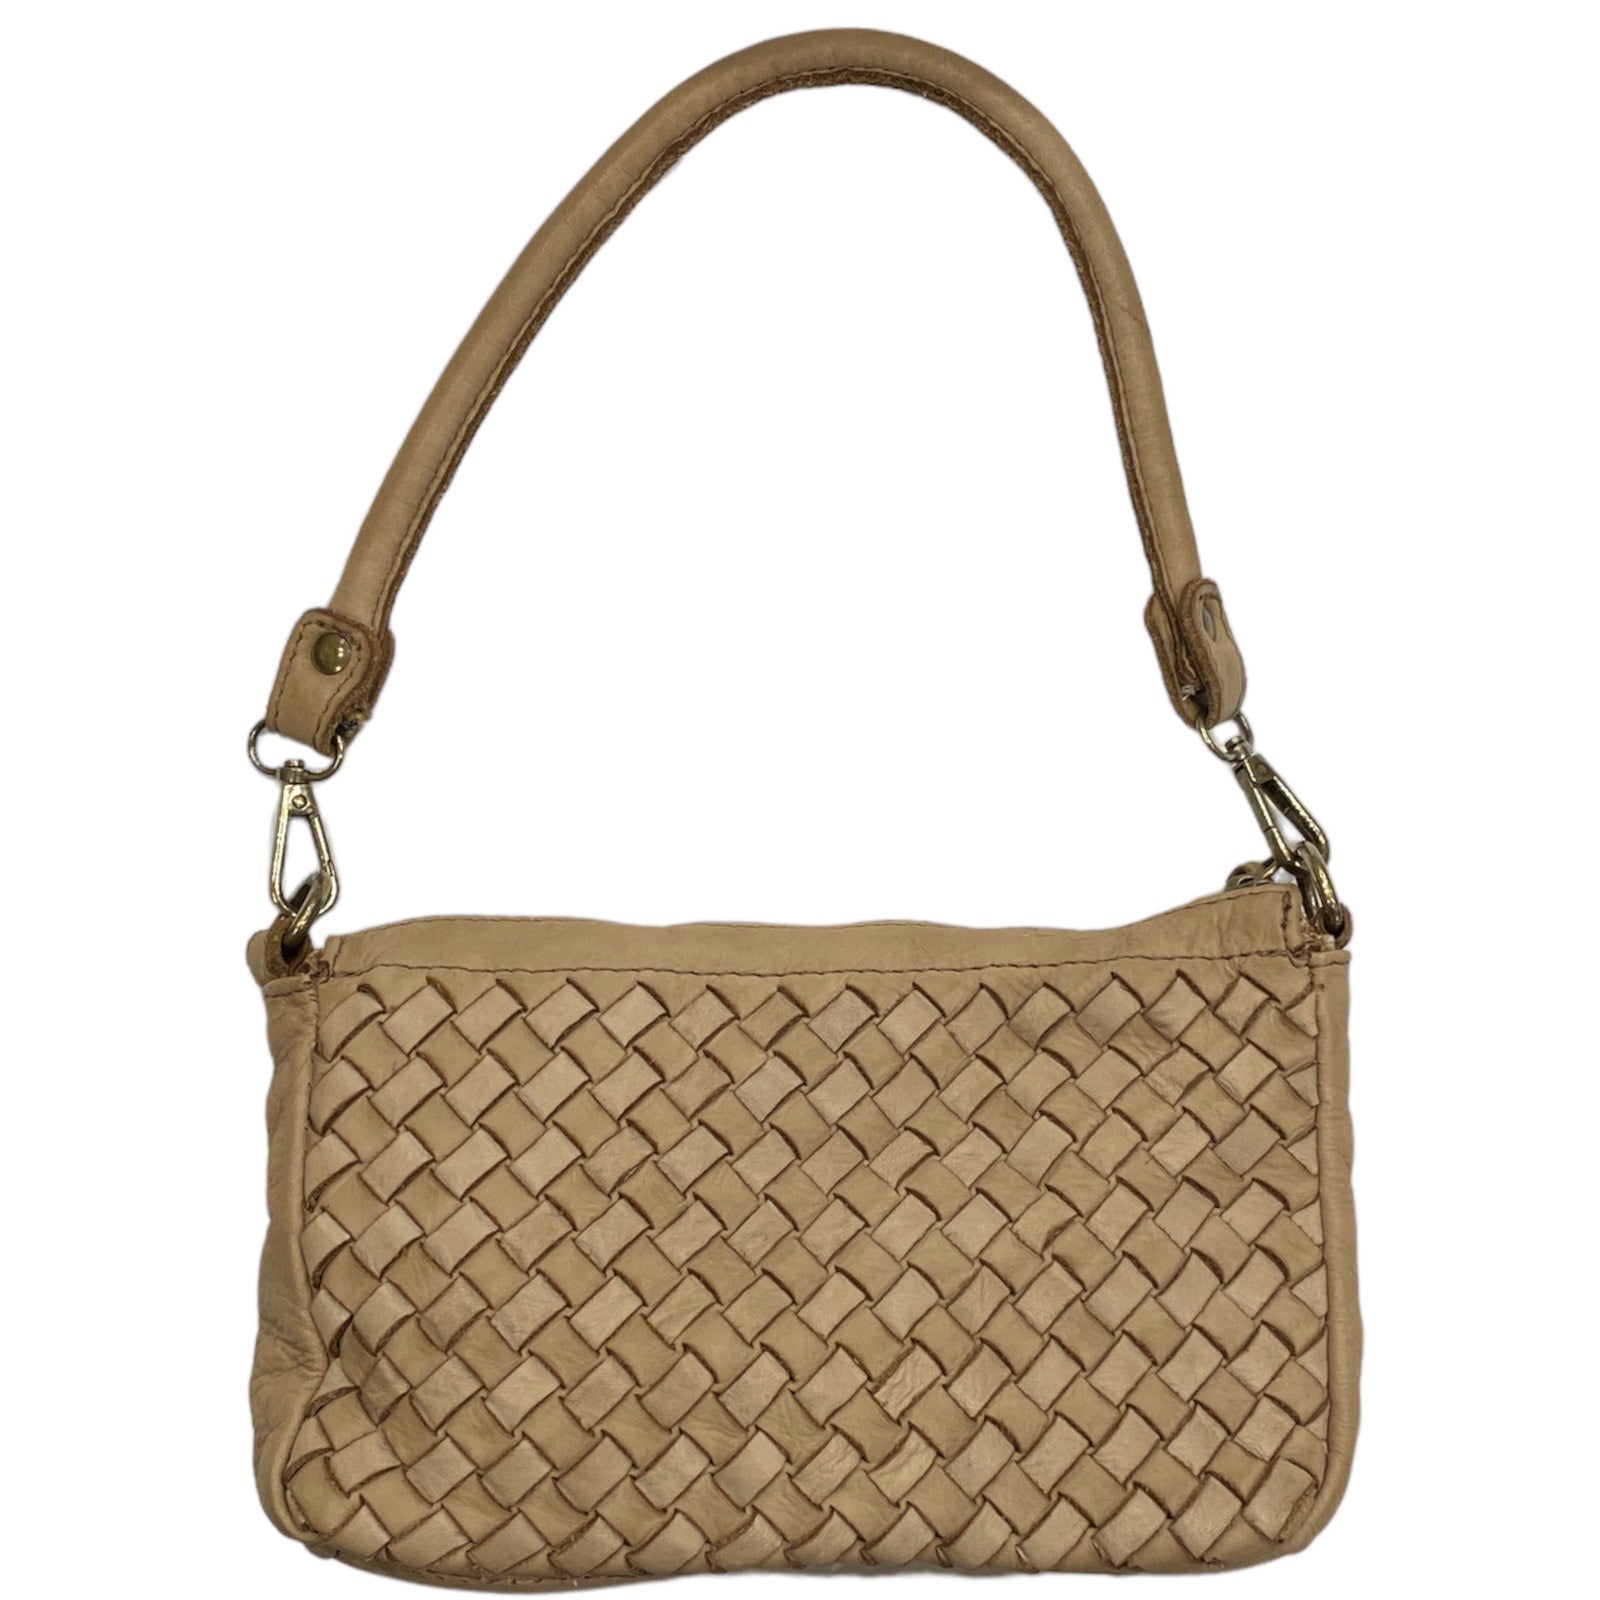 Taupe handwoven small shoulder bag